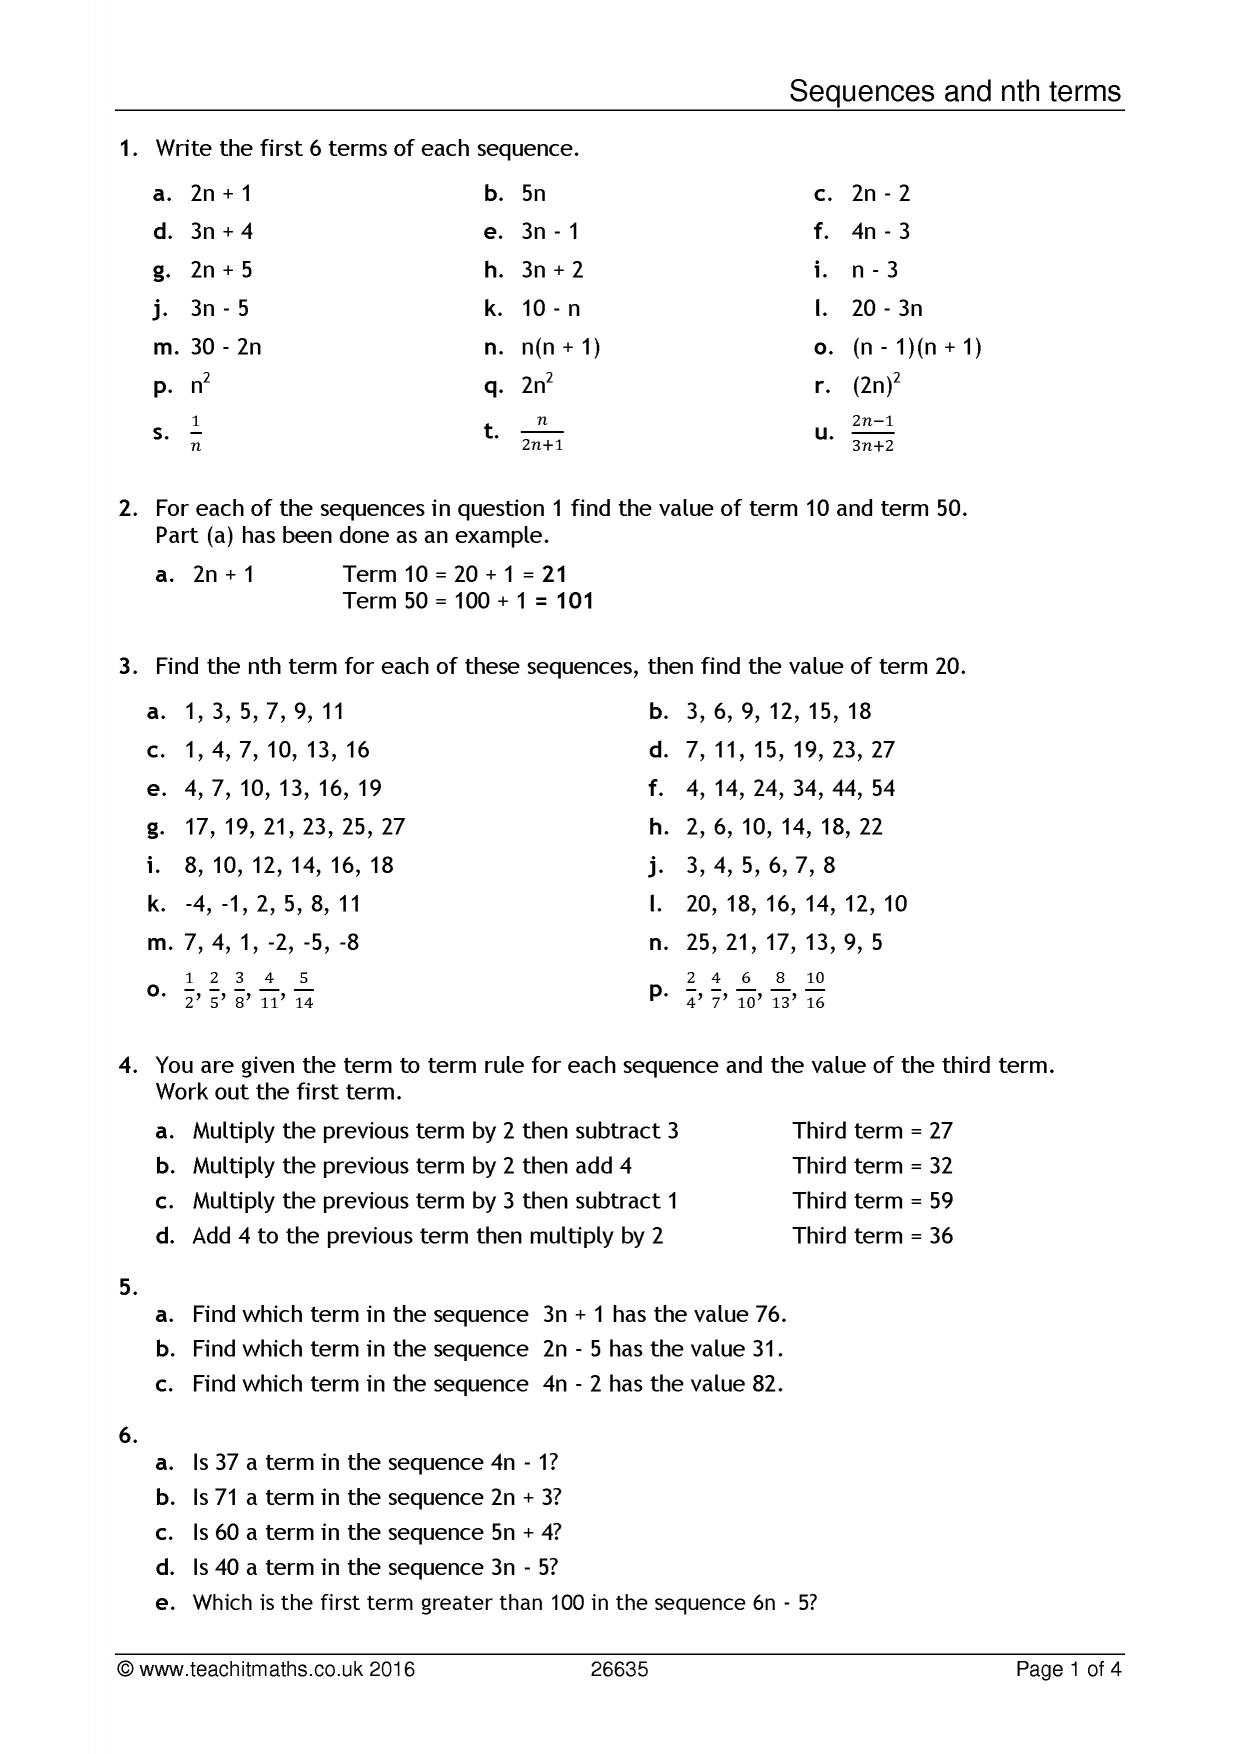 Sequences and nth terms worksheet [PDF] - Teachit Maths Intended For Arithmetic Sequence Worksheet Answers